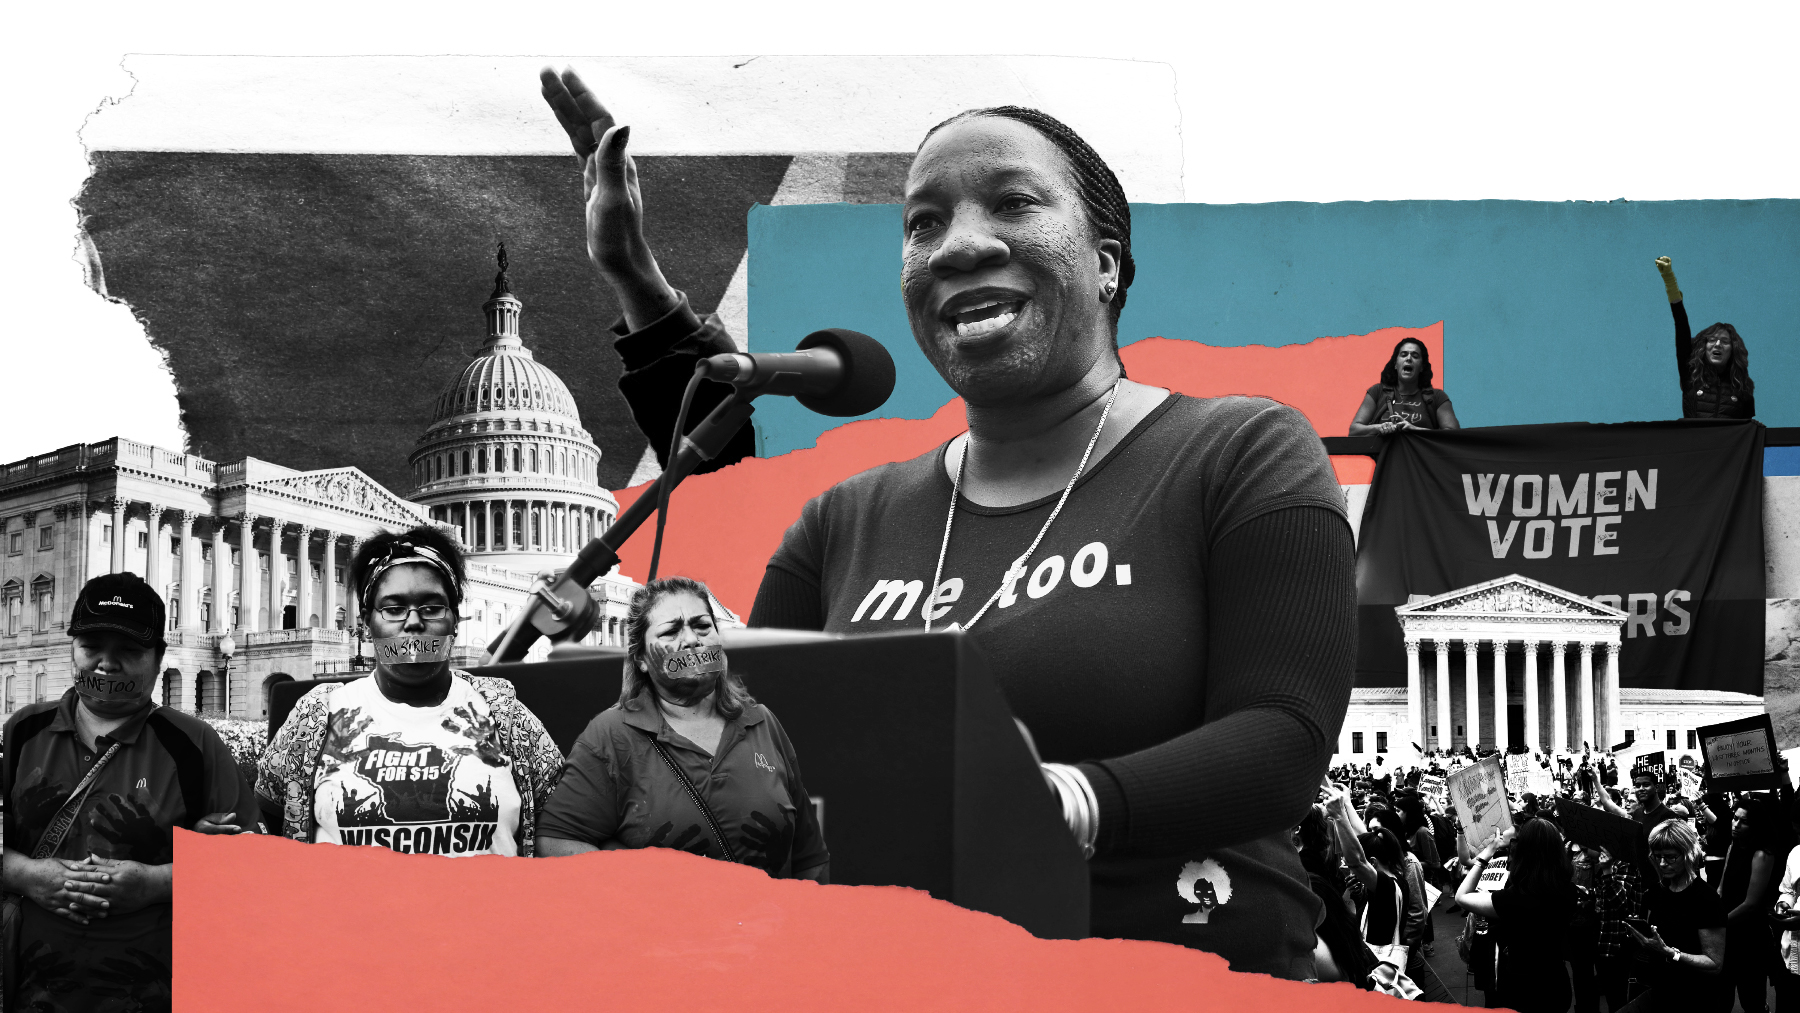 A photo illustration of a woman wearing a MeToo shirt speaking, with protests and the Capitol in the background.